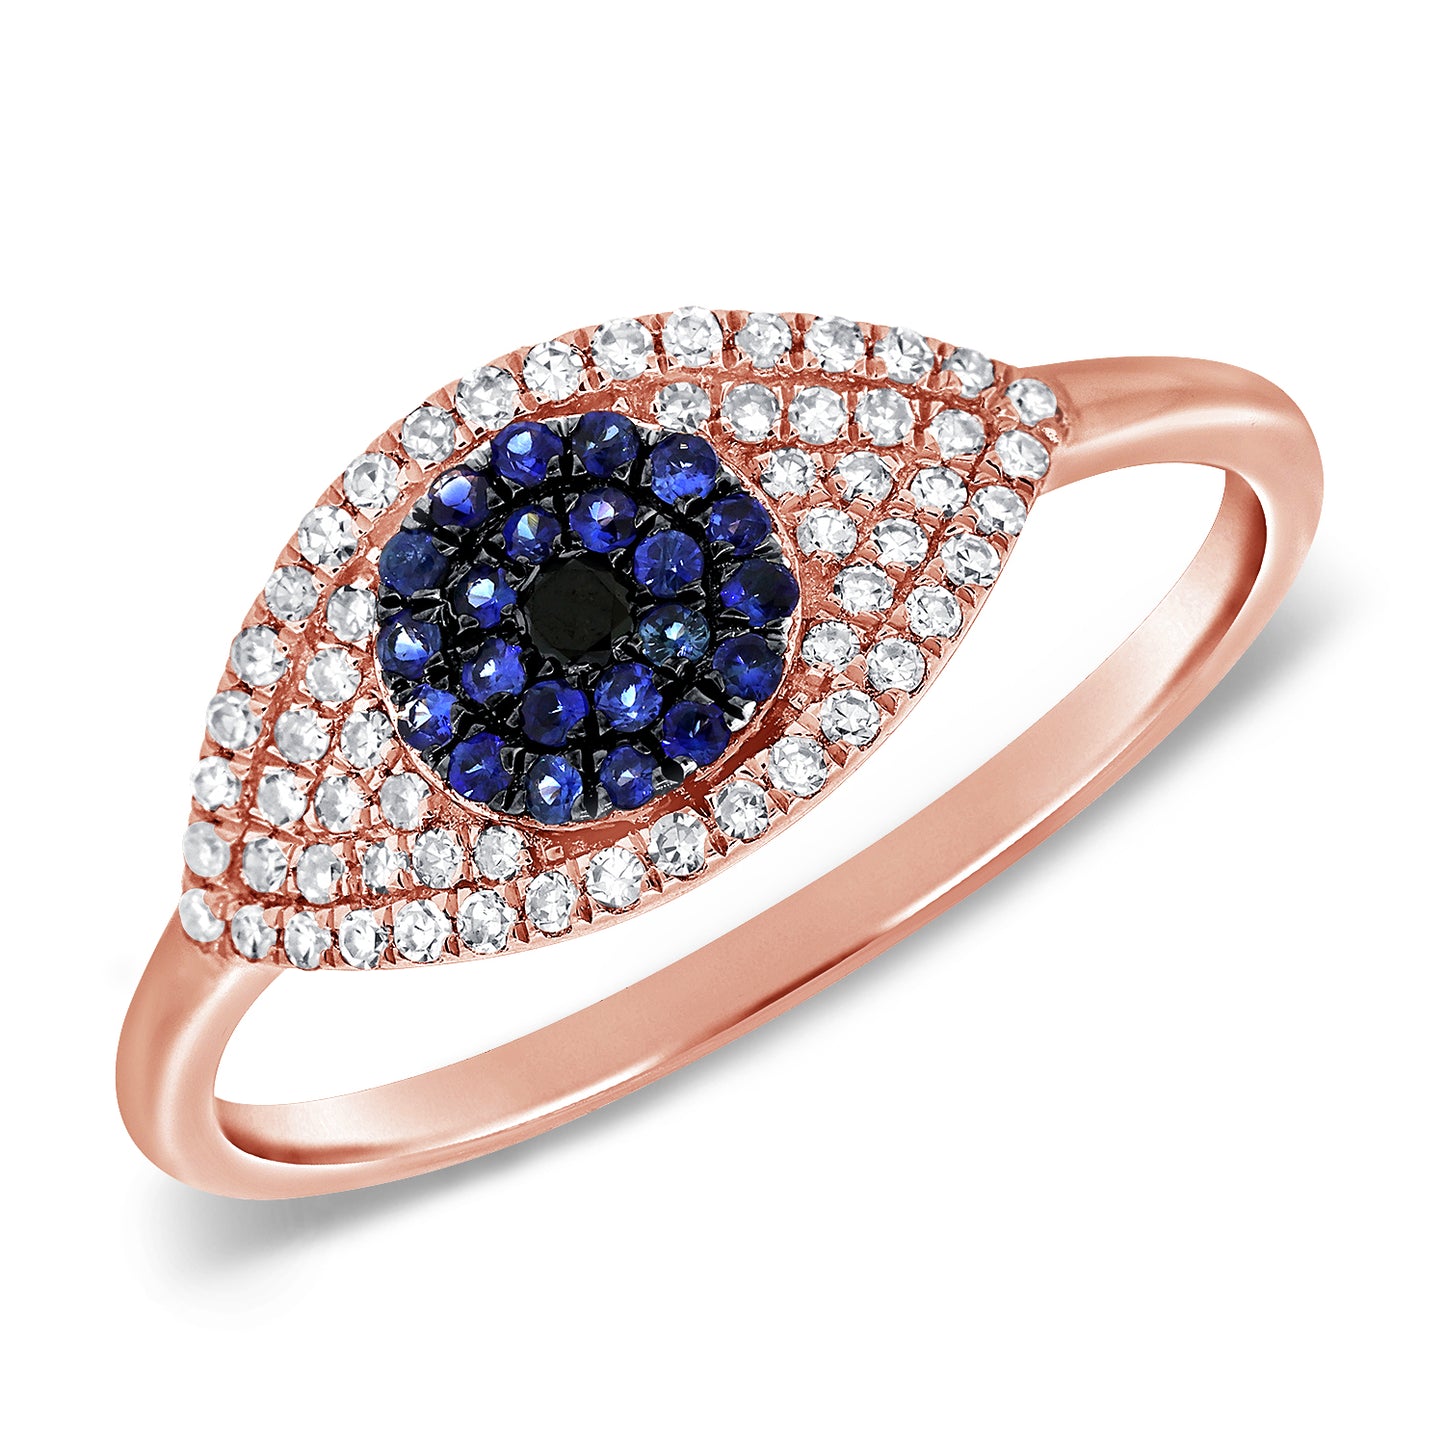 Eye Ring with Diamonds & Blue Sapphires